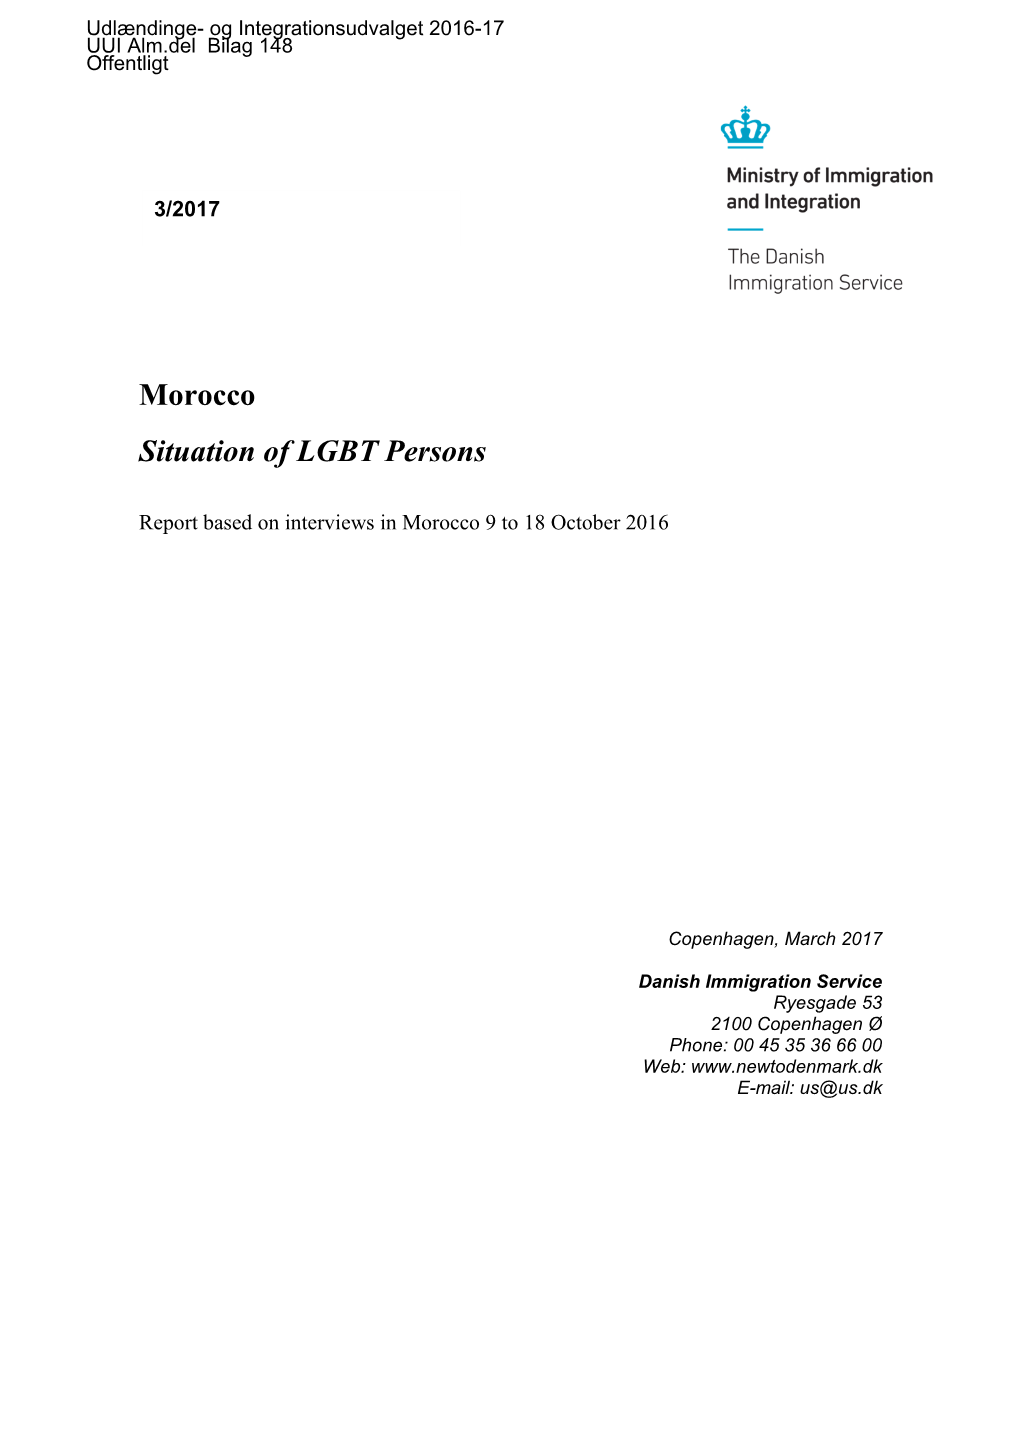 Morocco Situation of LGBT Persons